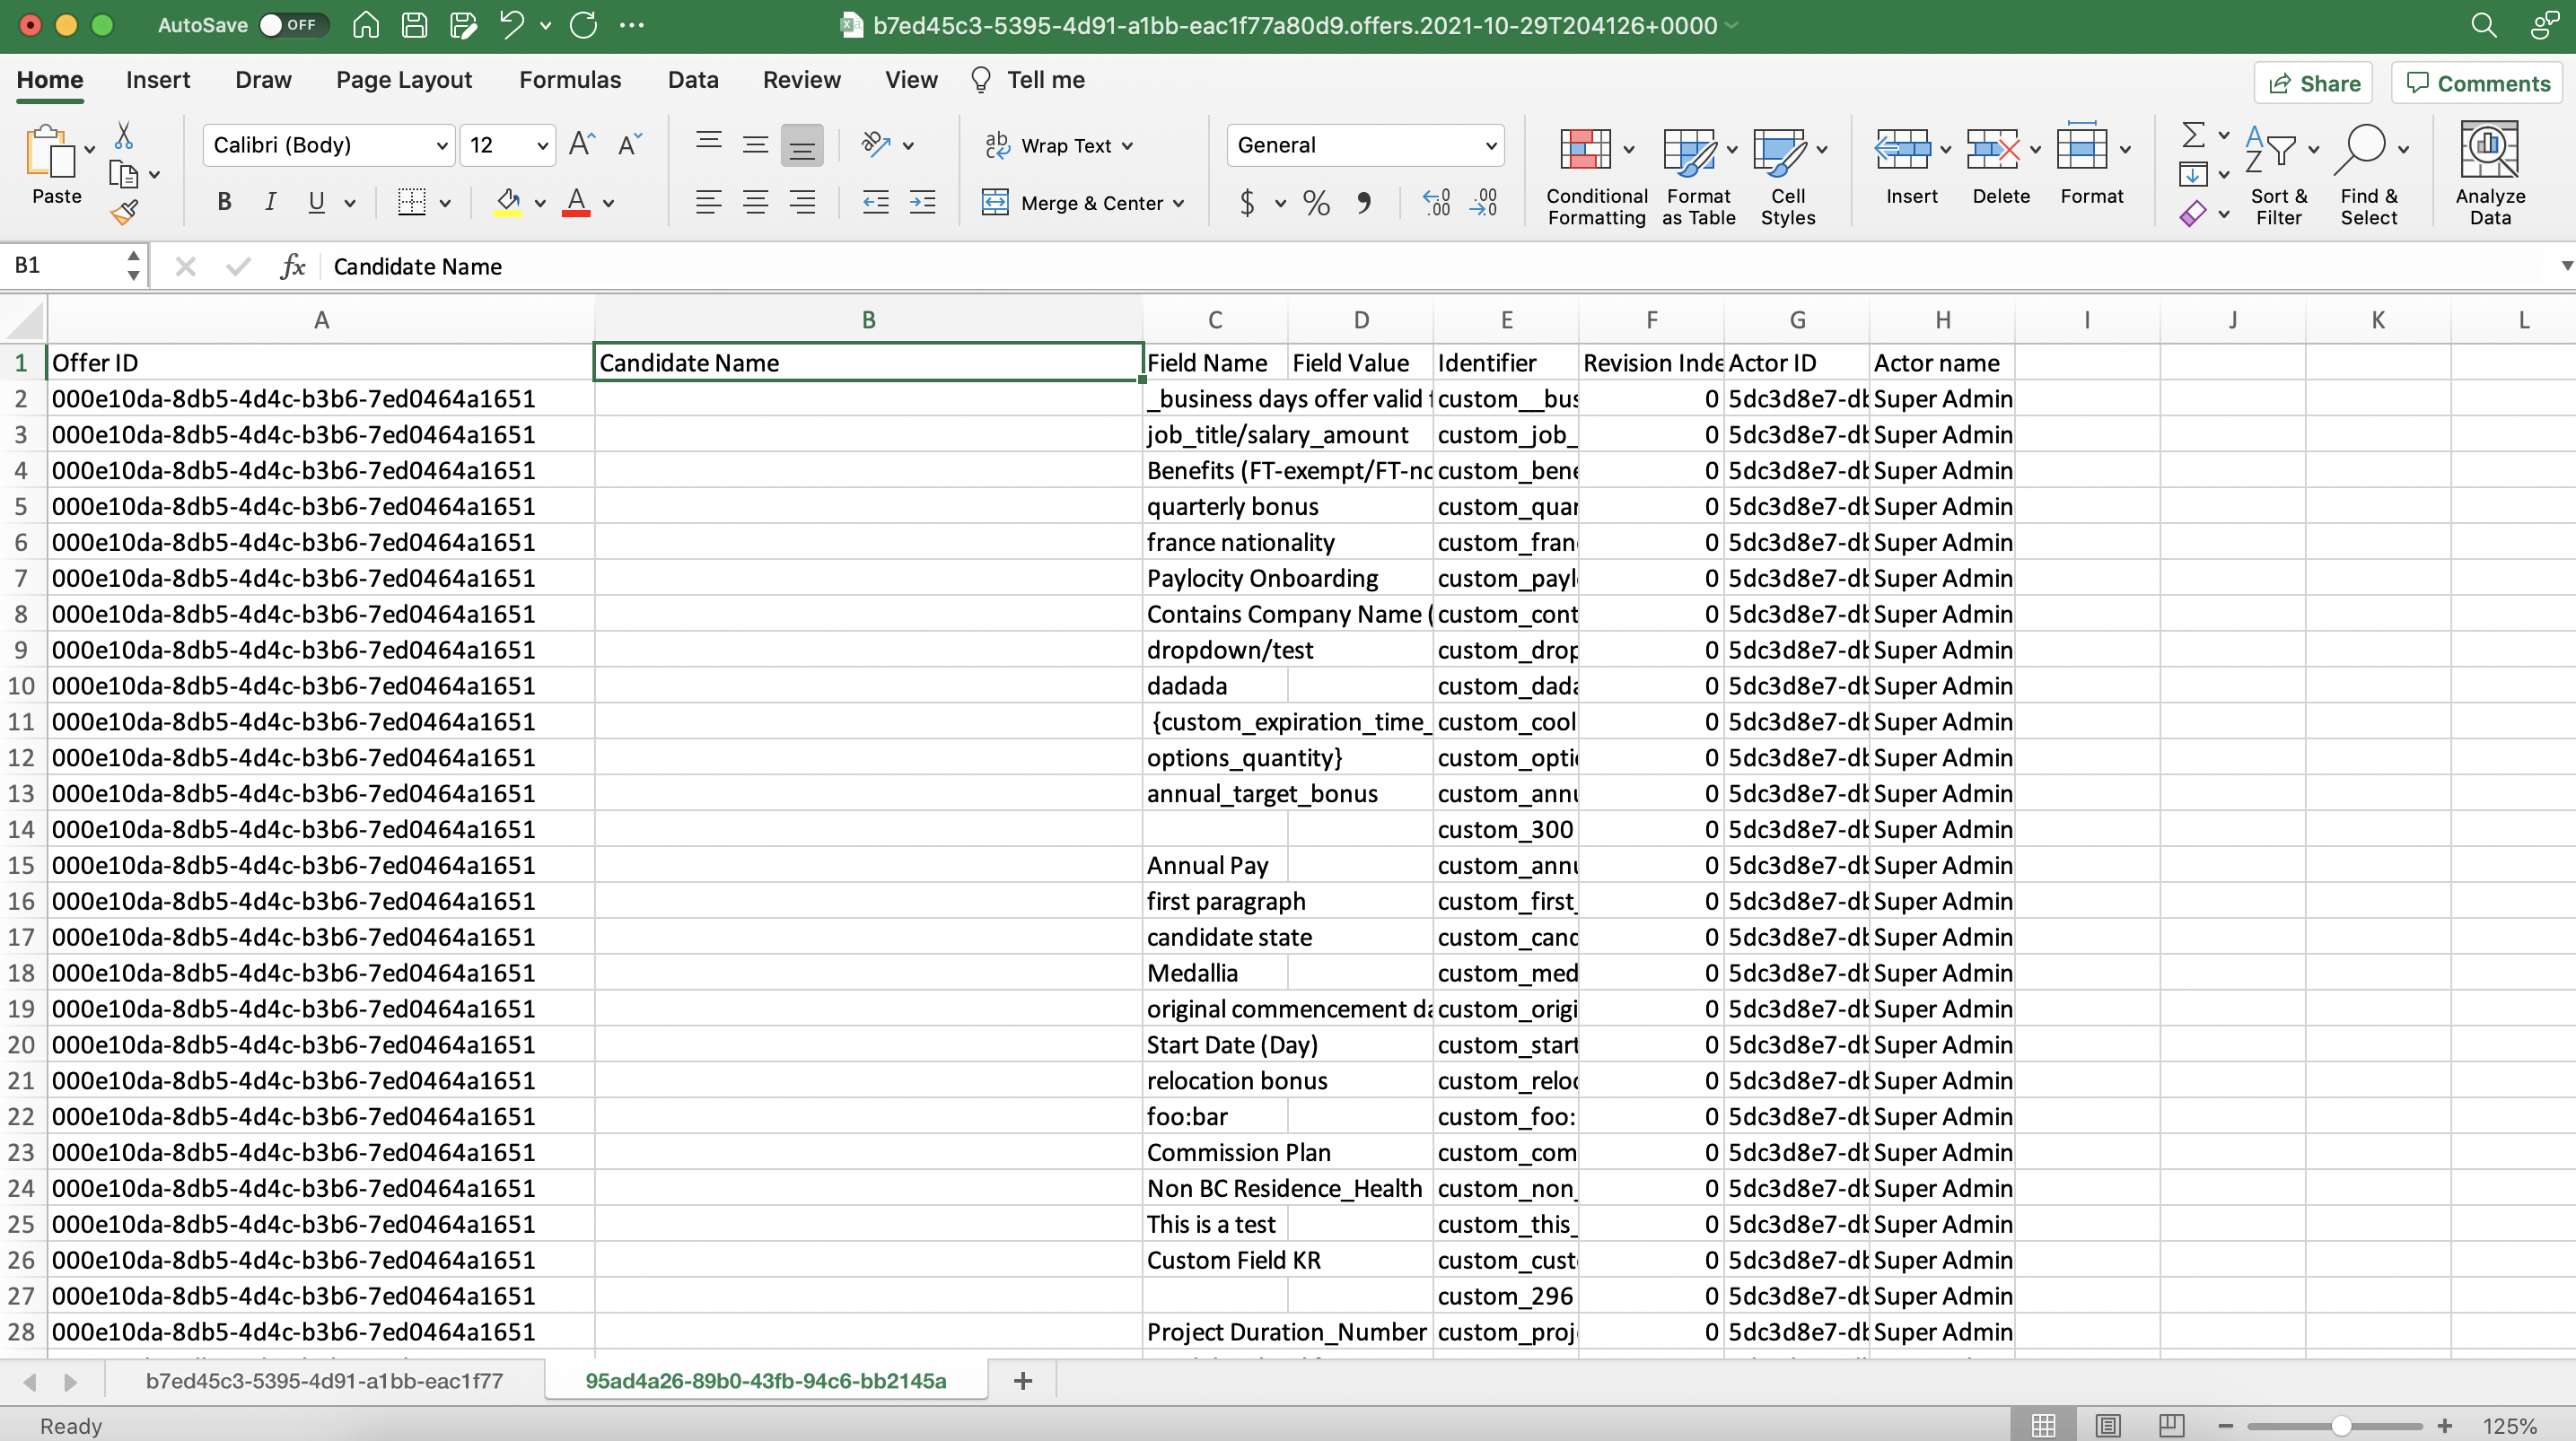 Offers custom fields spreadsheet with blank column B titled Candidate Name.